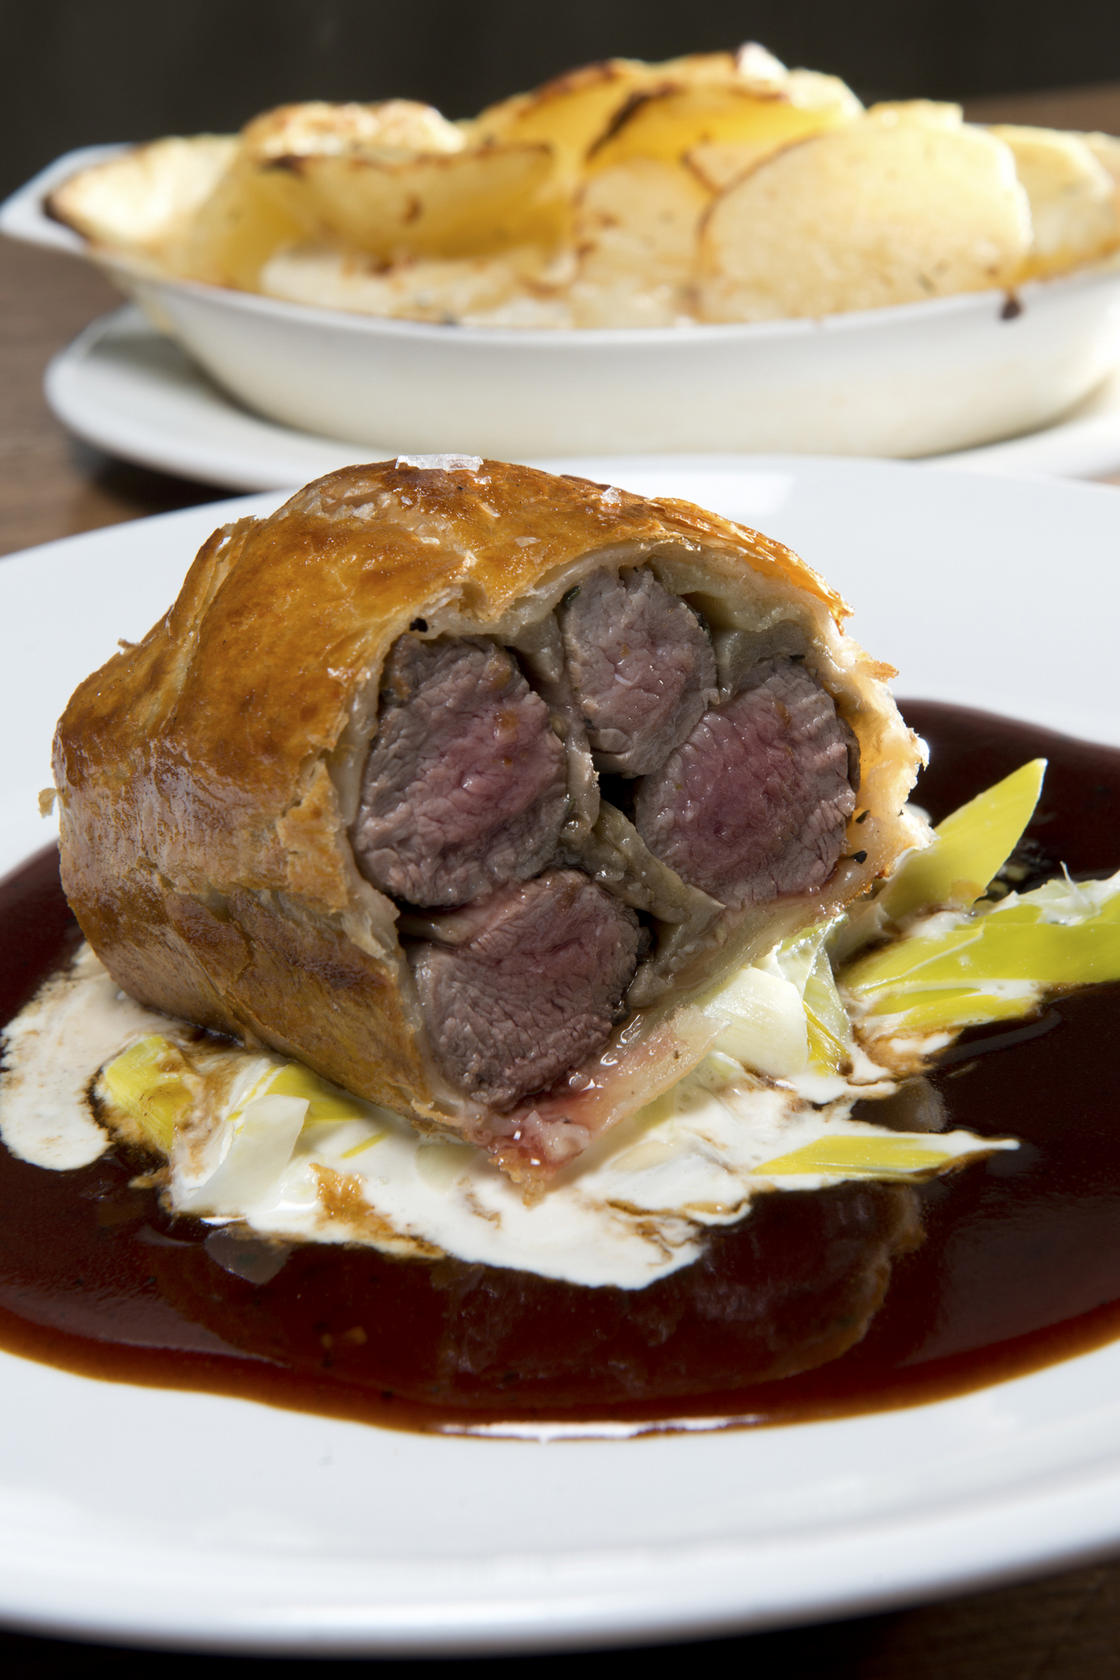 Orange Tree's lamb fillets and eggplant baked in puff pastry on creamed leeks and rosemary jus.